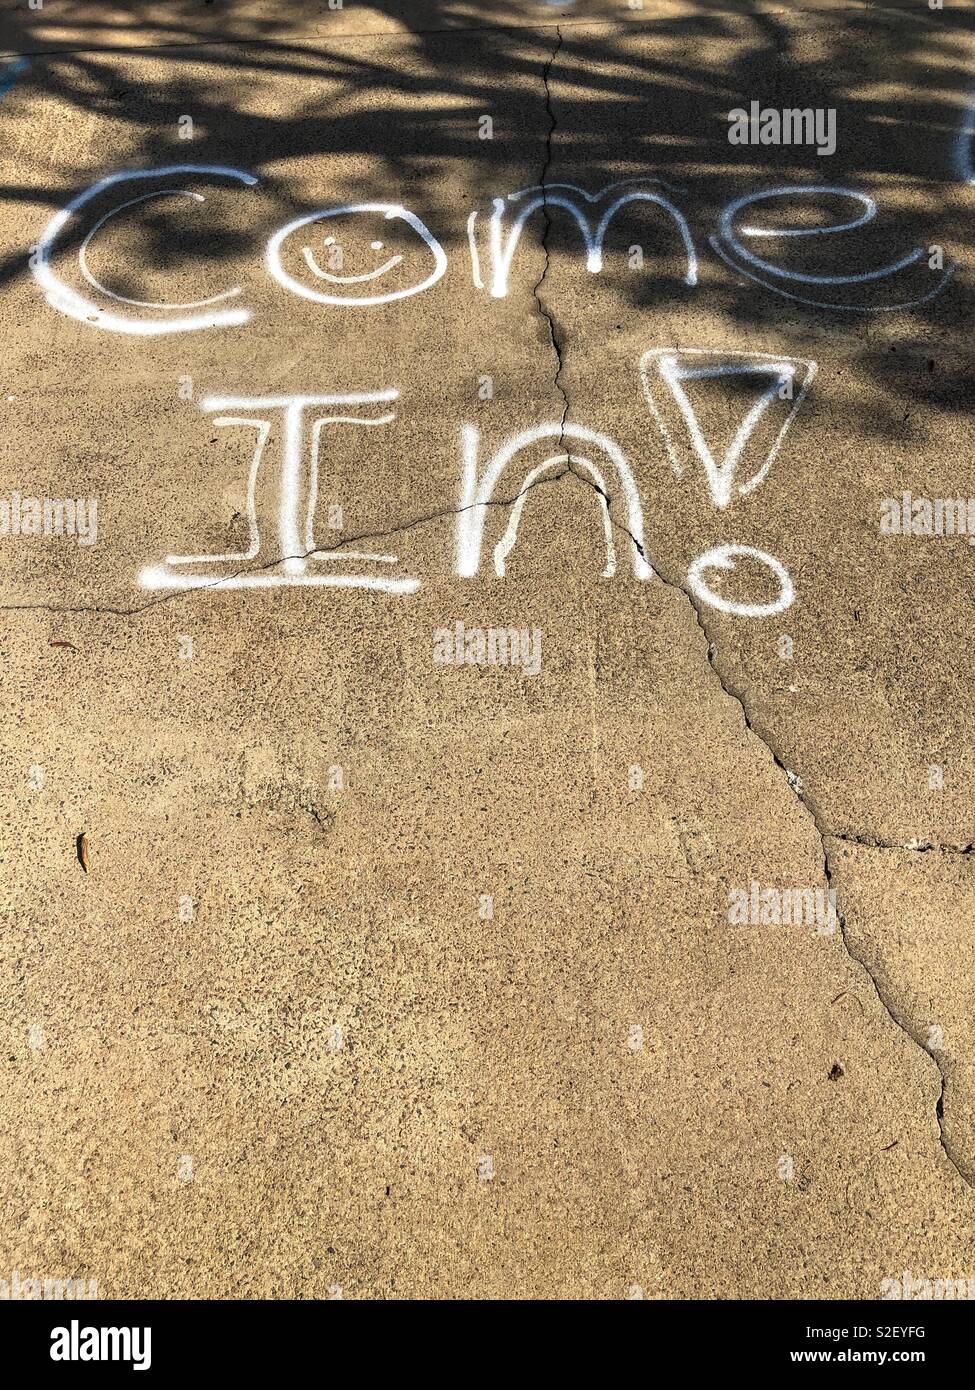 Come In graffitied on the footpath. Stock Photo